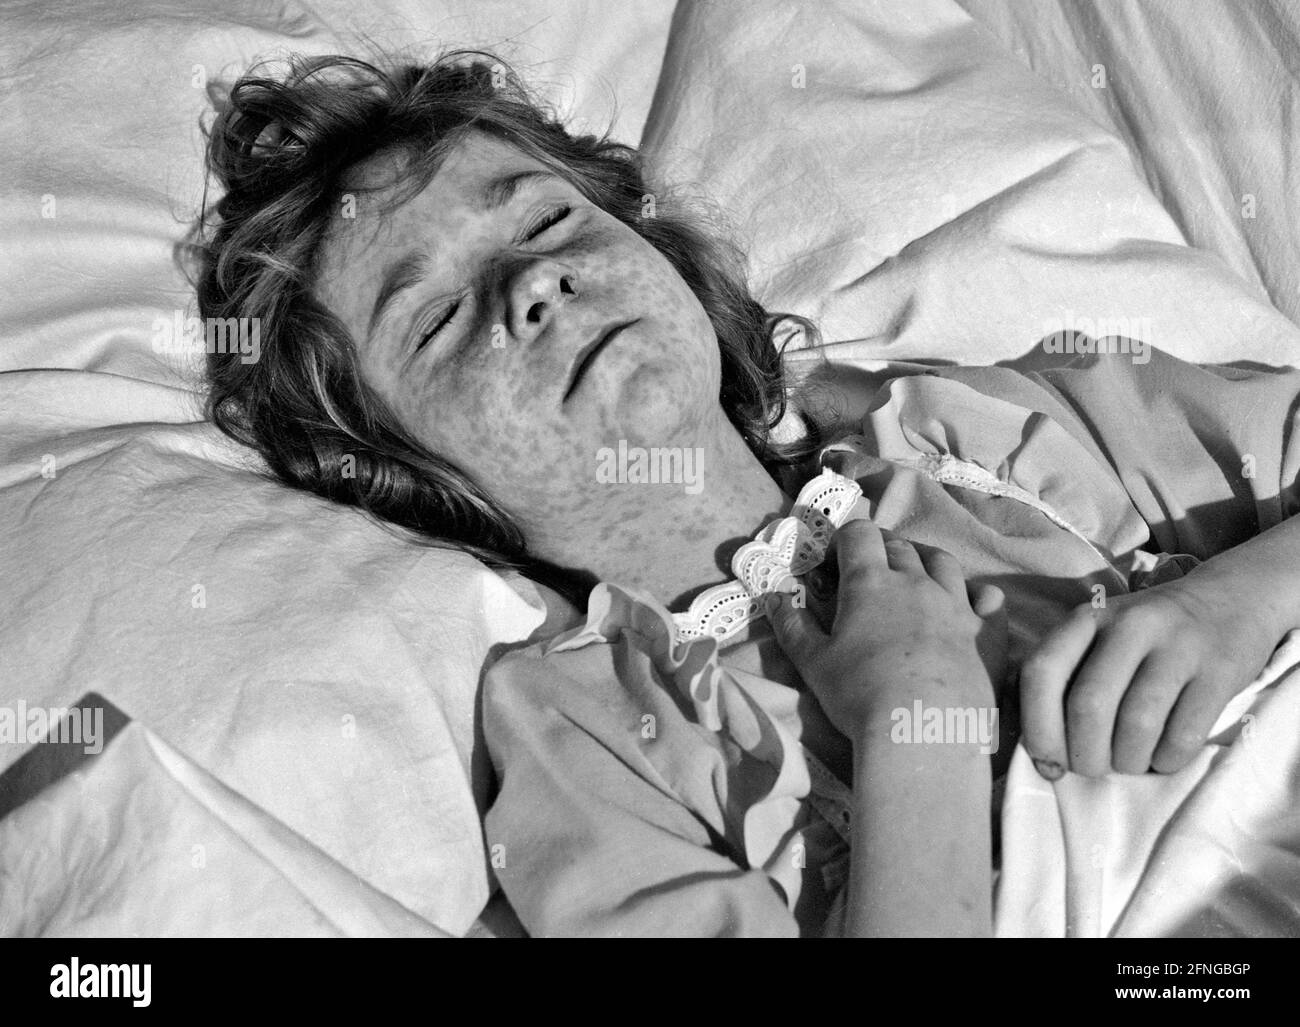 Five-year-old girl with severe measles infection [automated translation] Stock Photo